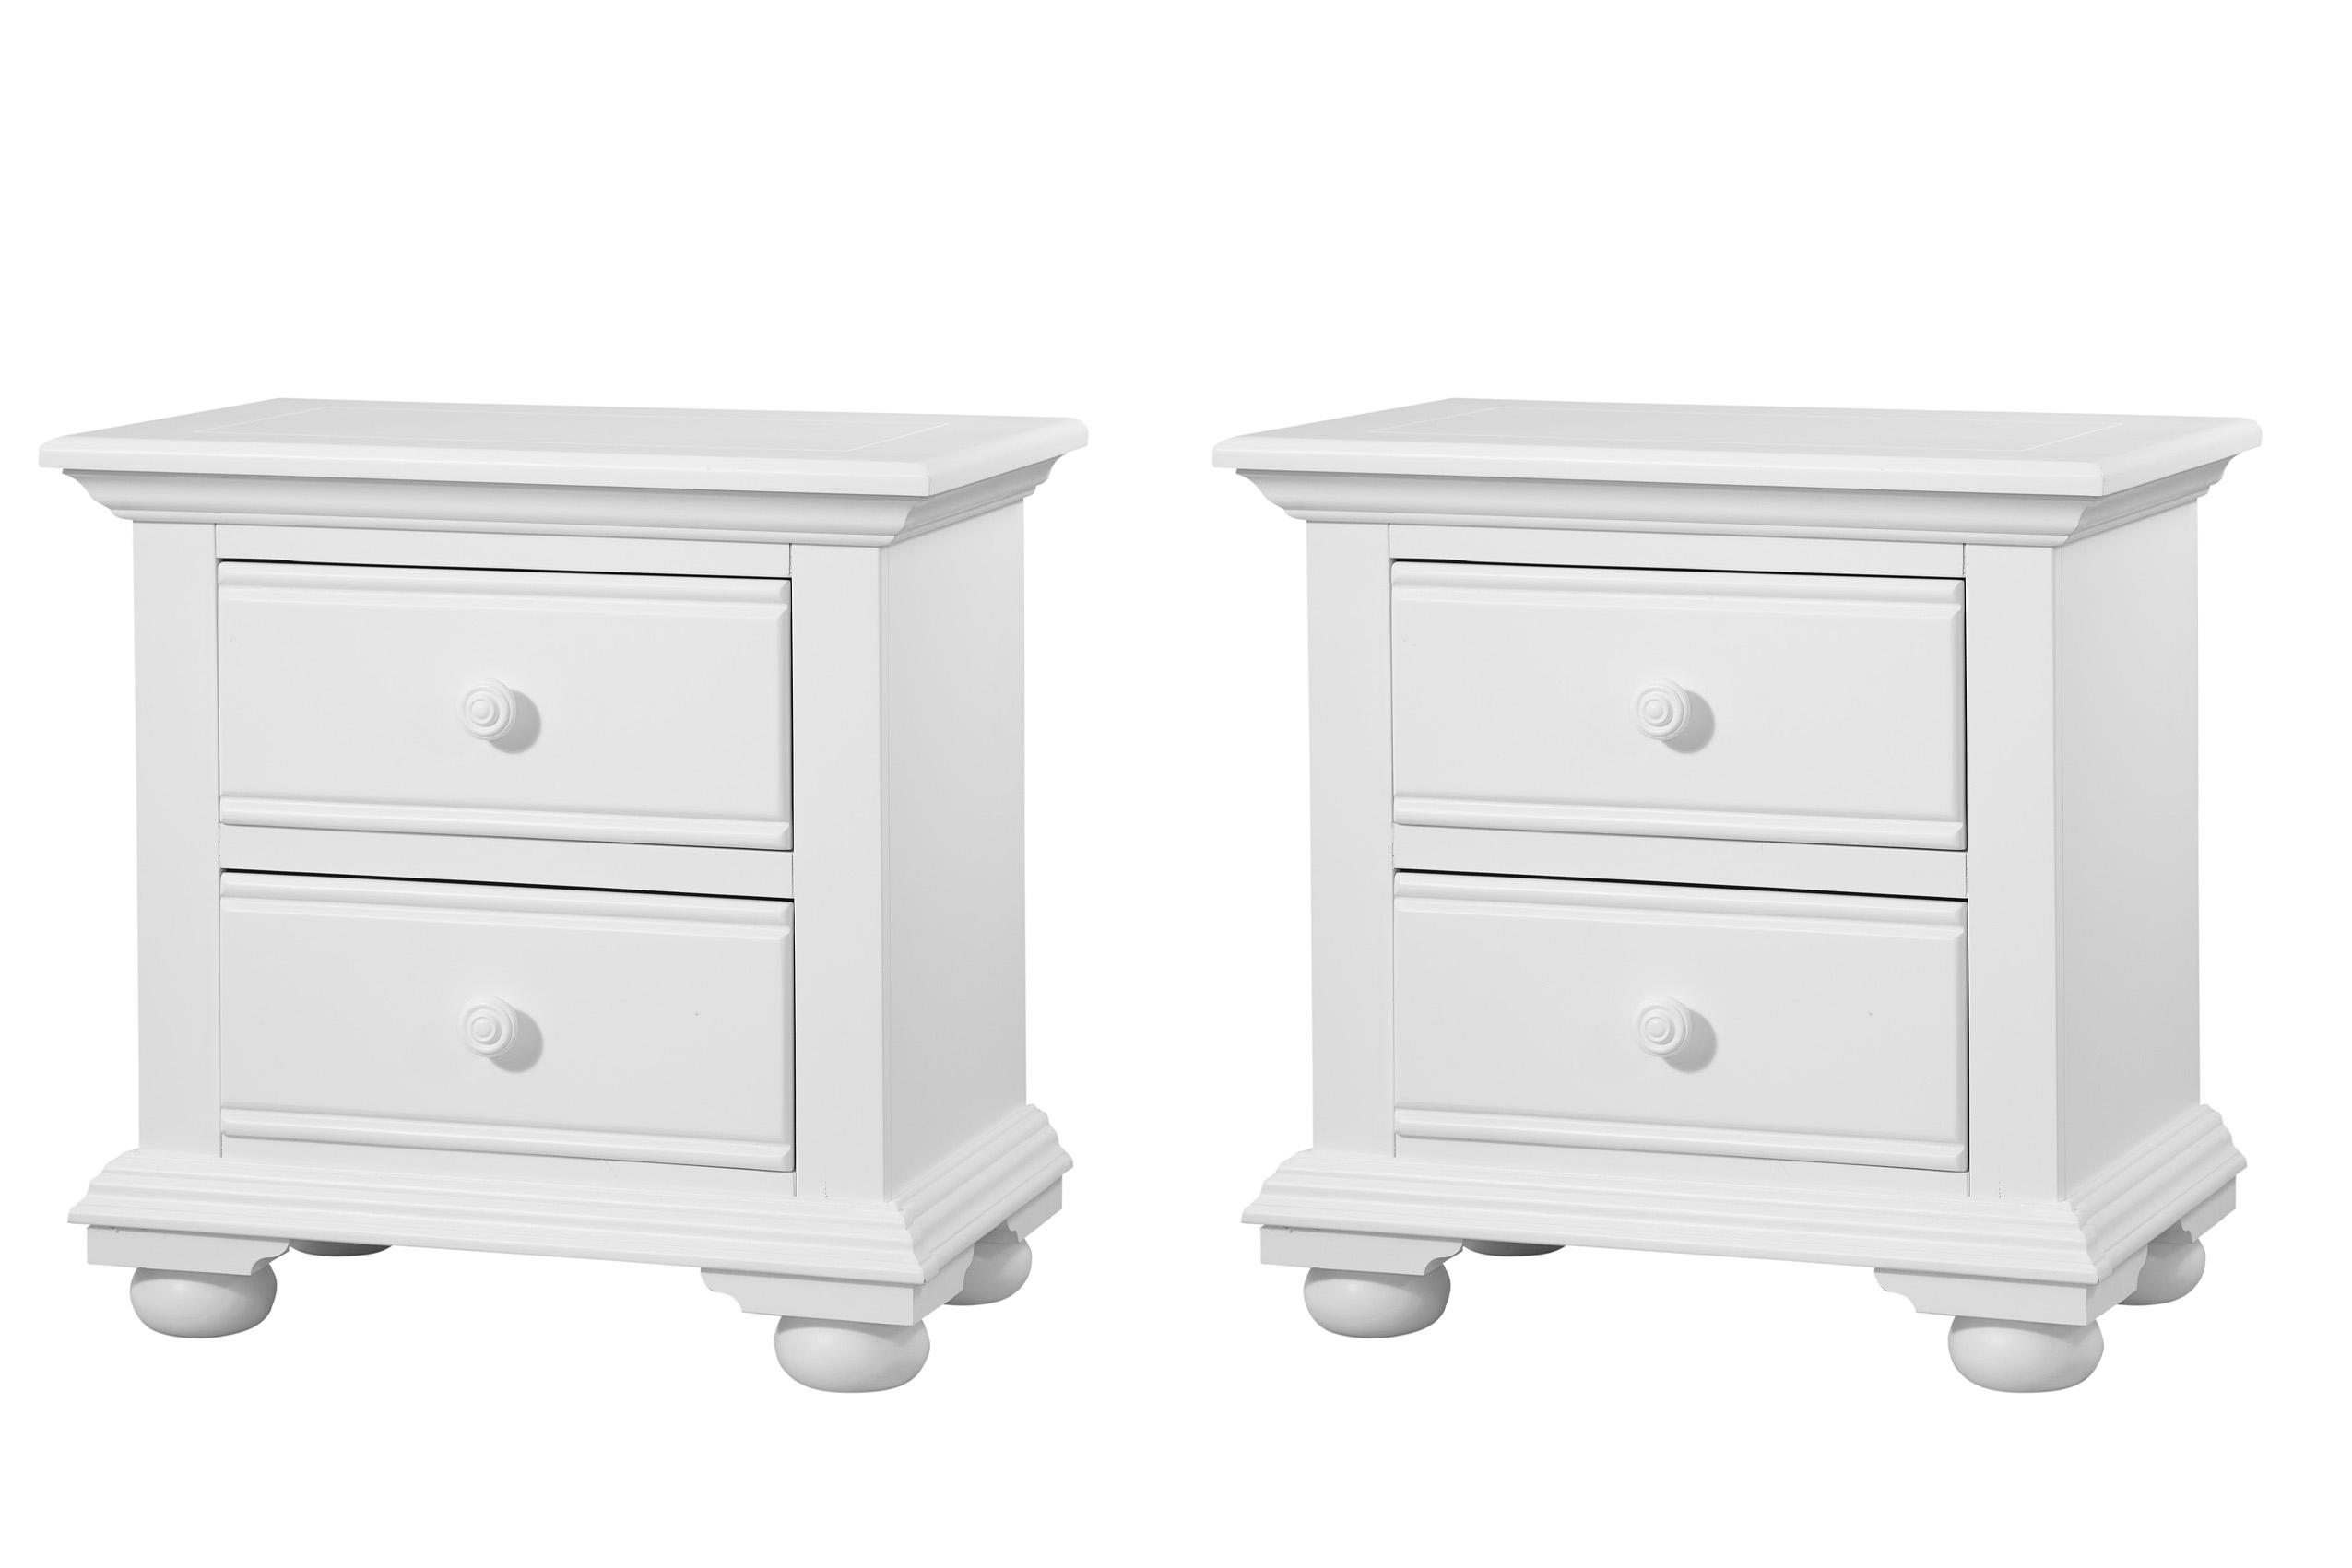 Classic, Traditional, Cottage Nightstand Set COTTAGE 6510-420 6510-420-Set-2 in White 